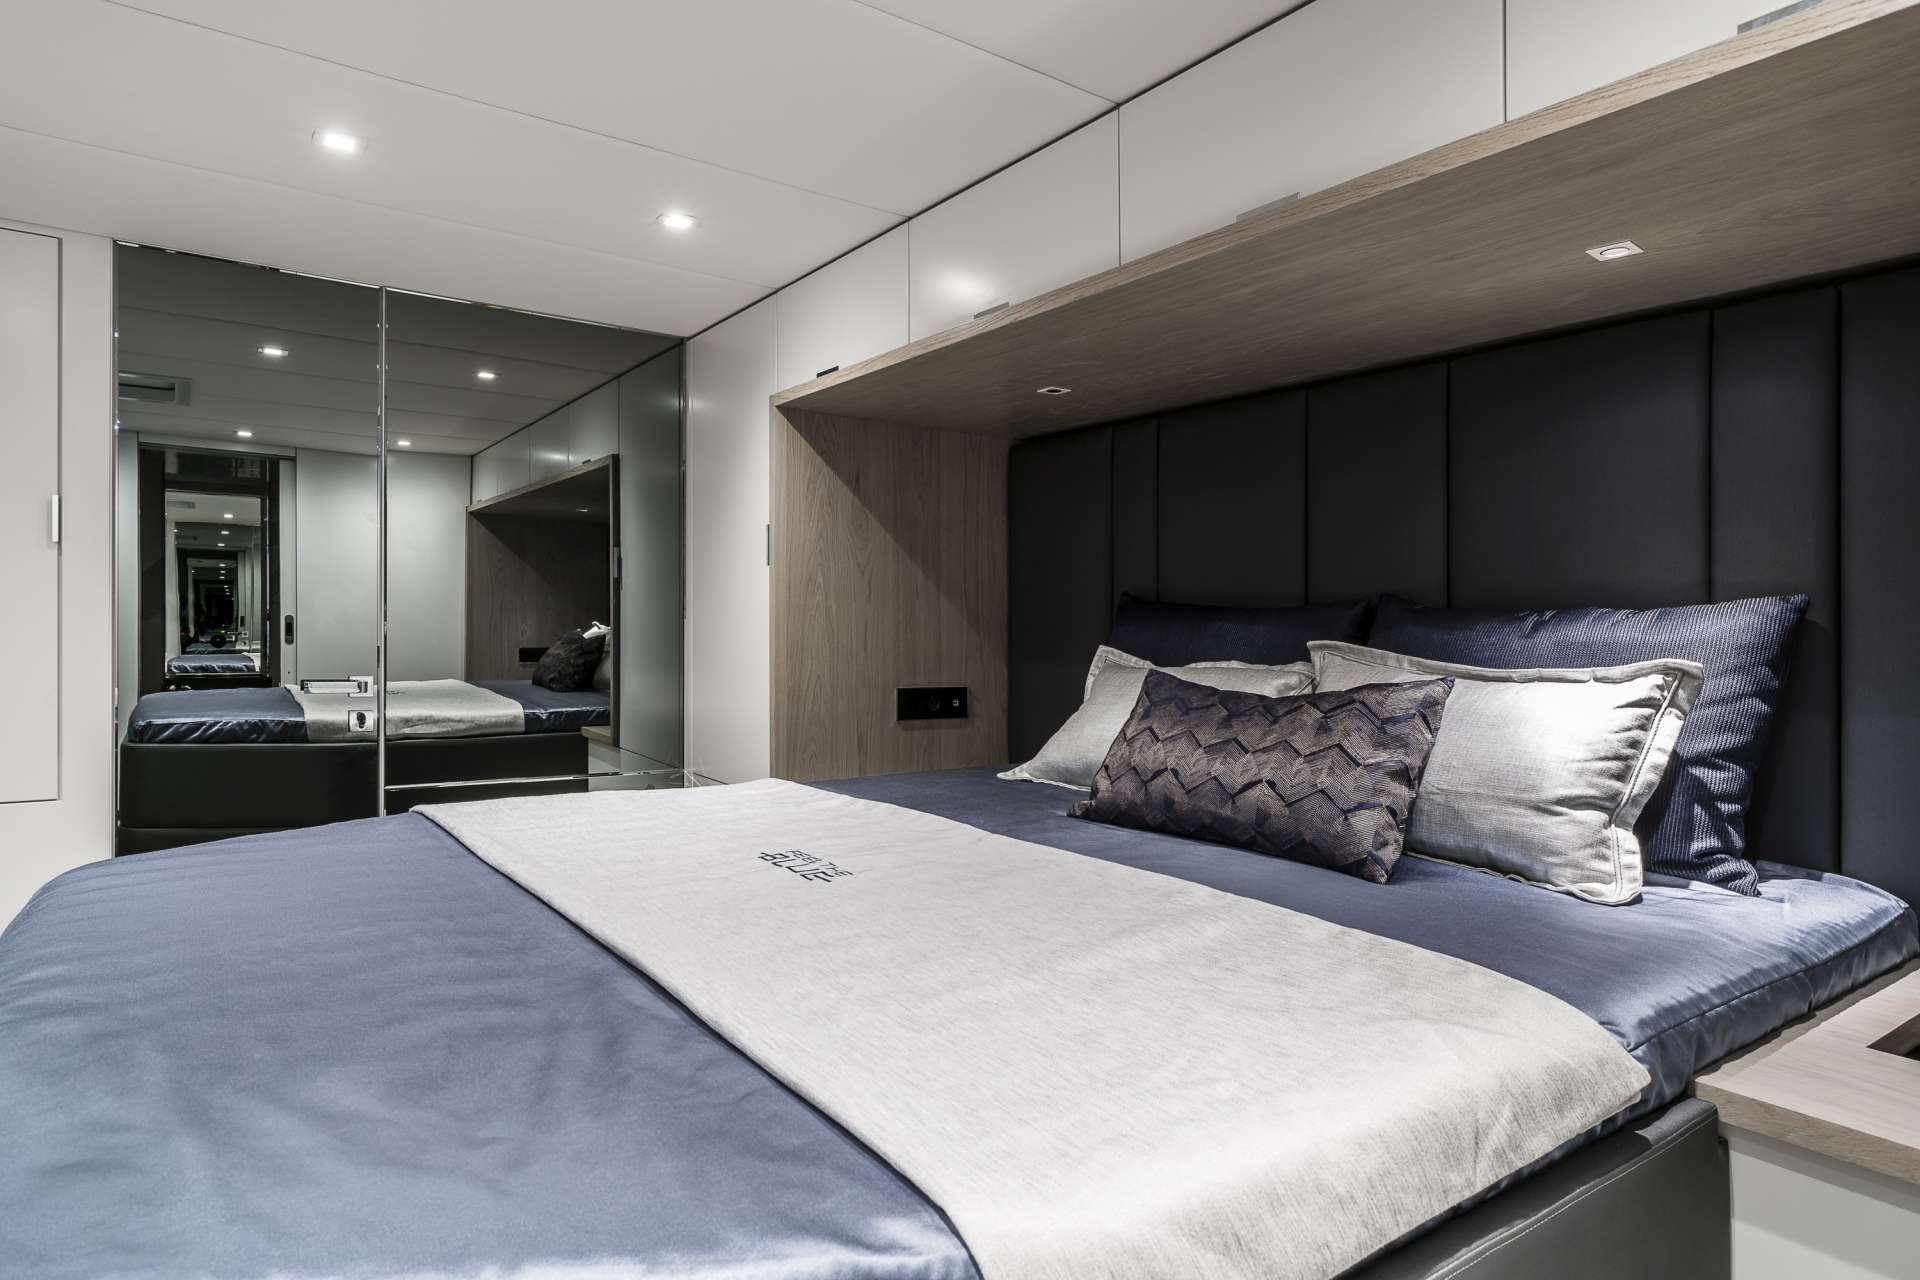 FEEL THE BLUE Yacht Charter - Guest cabin